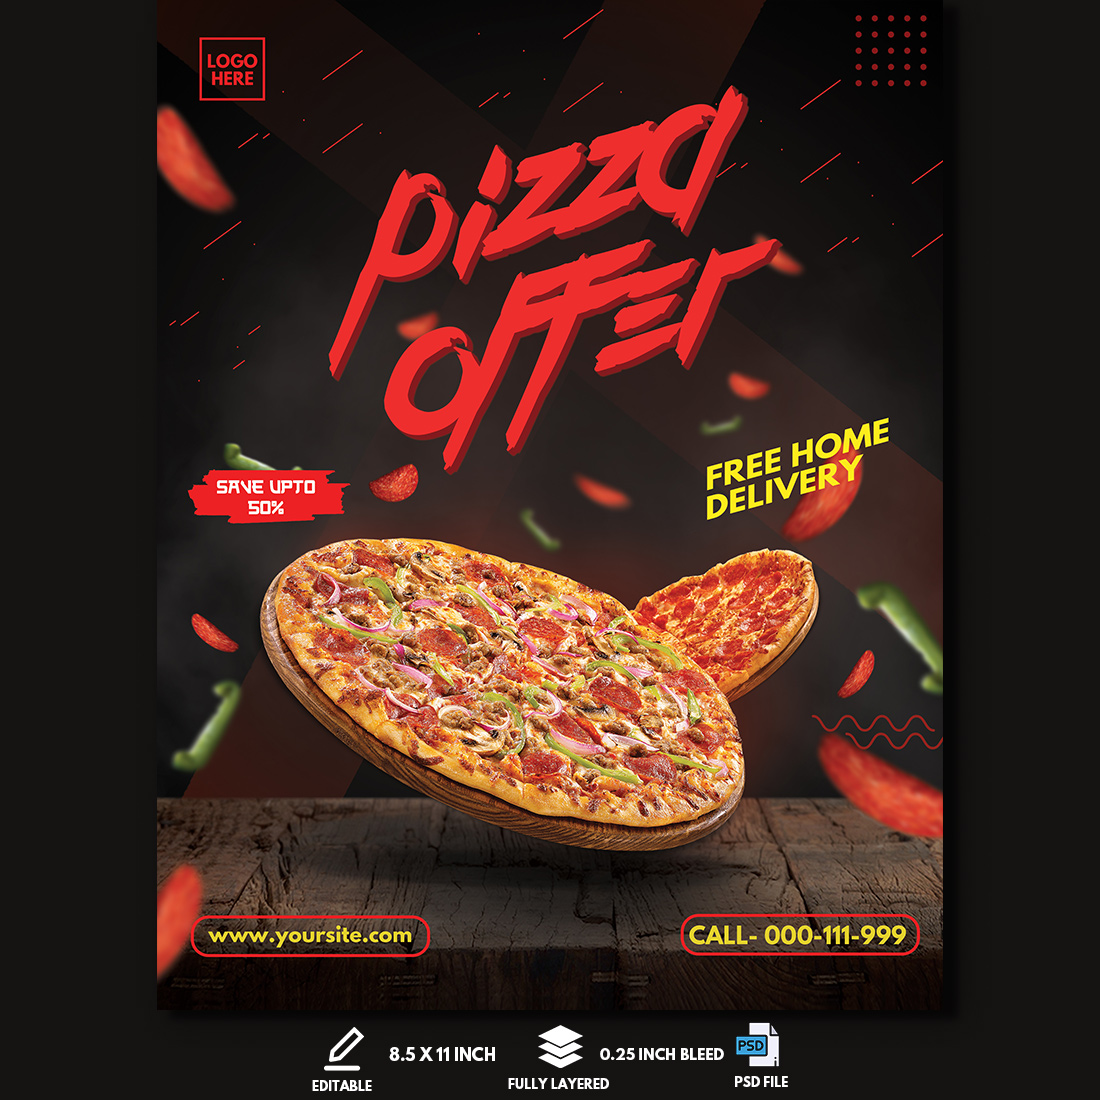 Pizza Menu Flyer Template cover image.